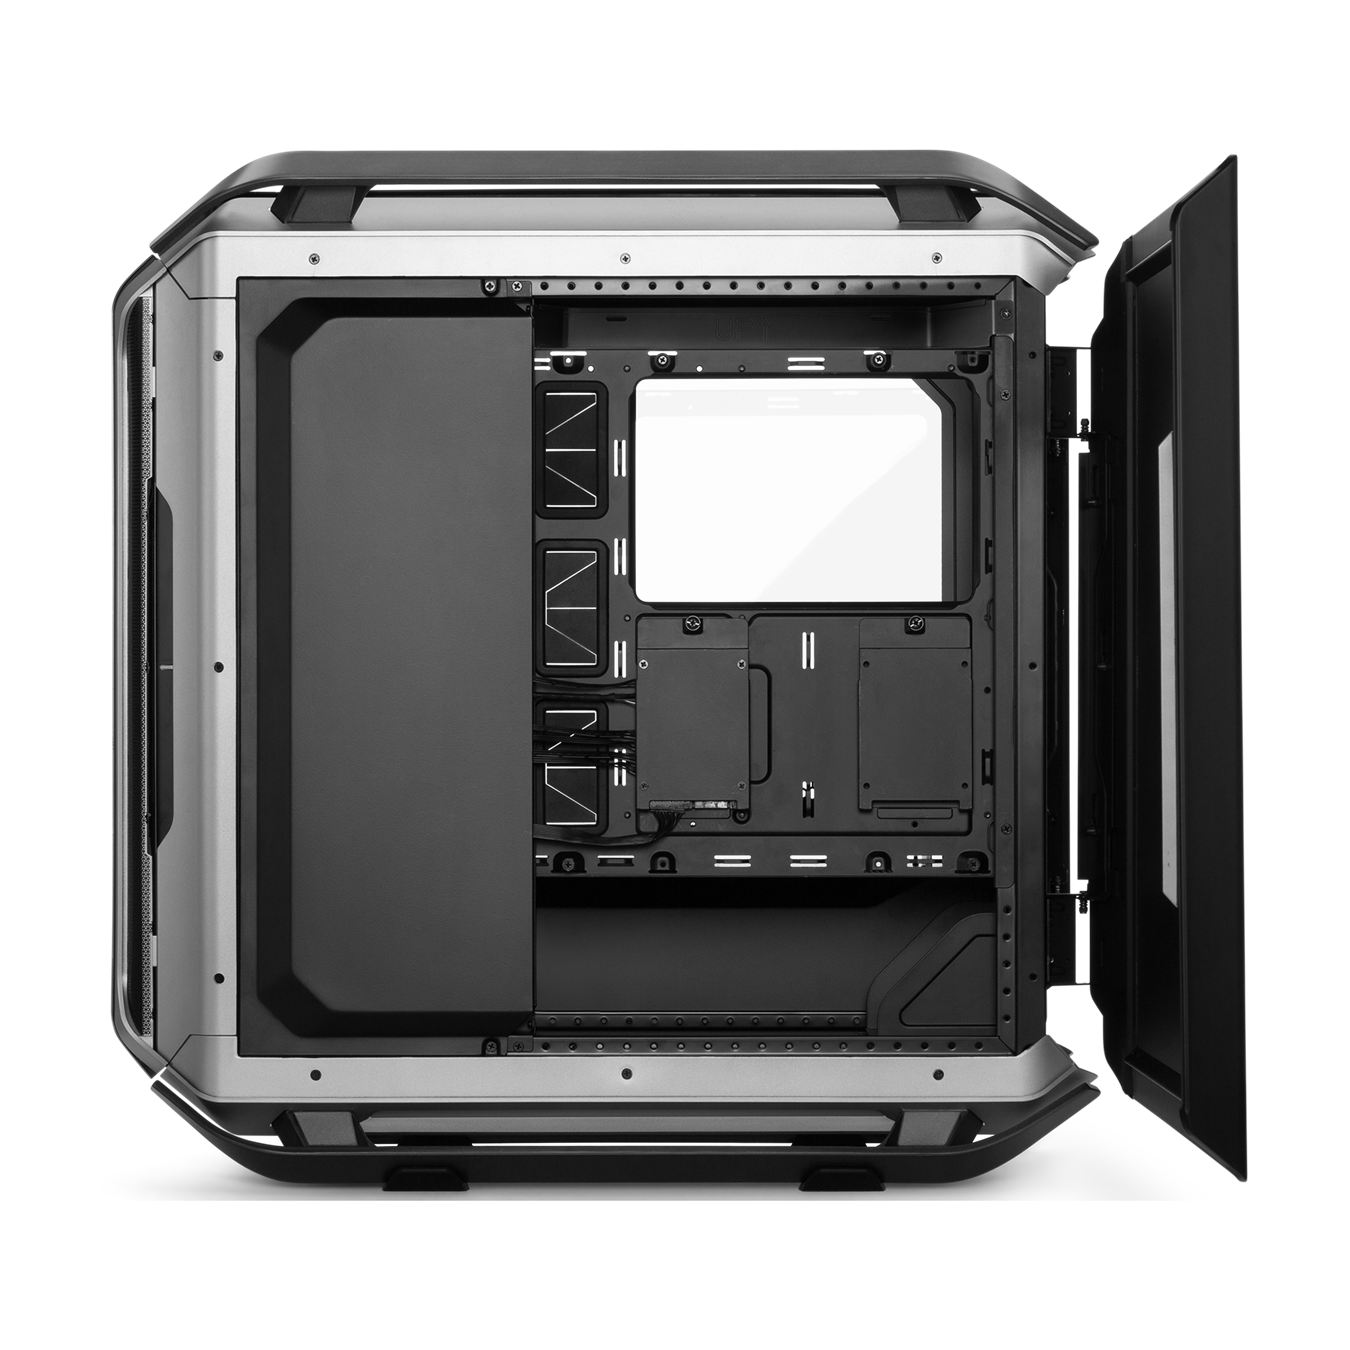 COSMOS C700M - The graphics card bracket can be mounted vertically or horizontally on either the PSU midplate or on the M. Port